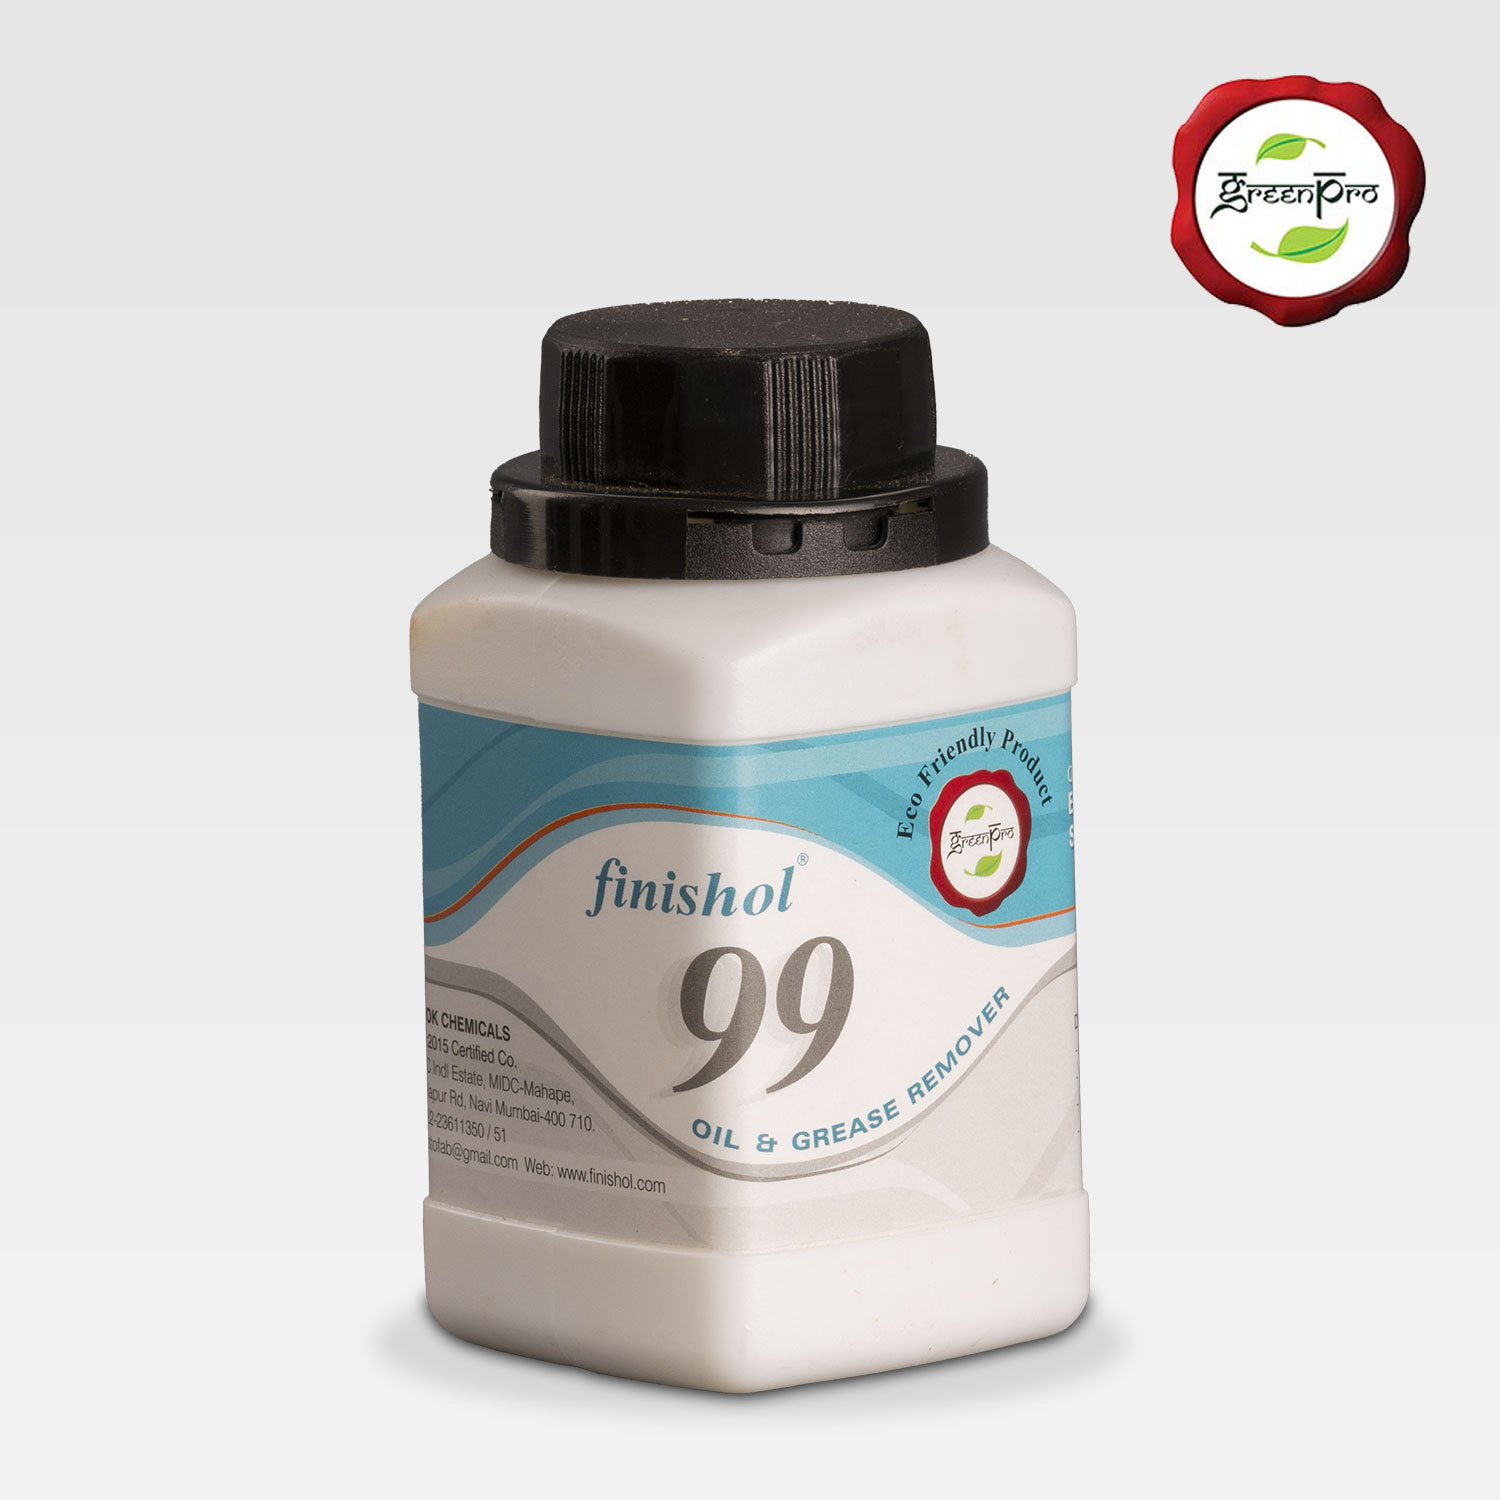 Waterless Oil and Grease Cleaner - Finishol 99